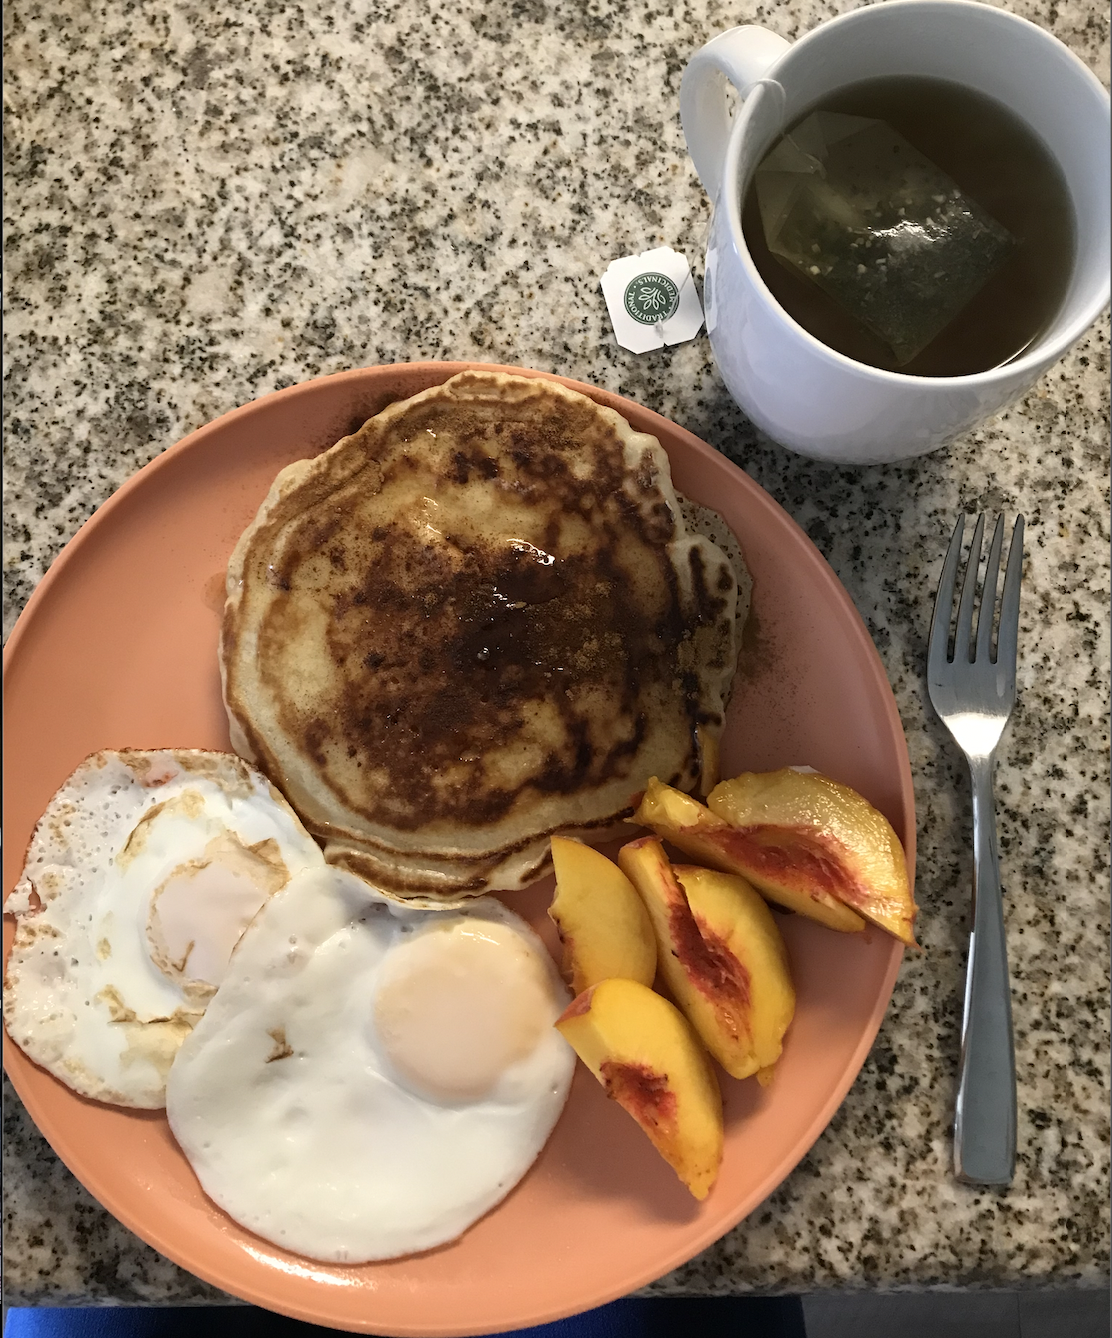 Pancake, eggs, and fruit with a cup of tea